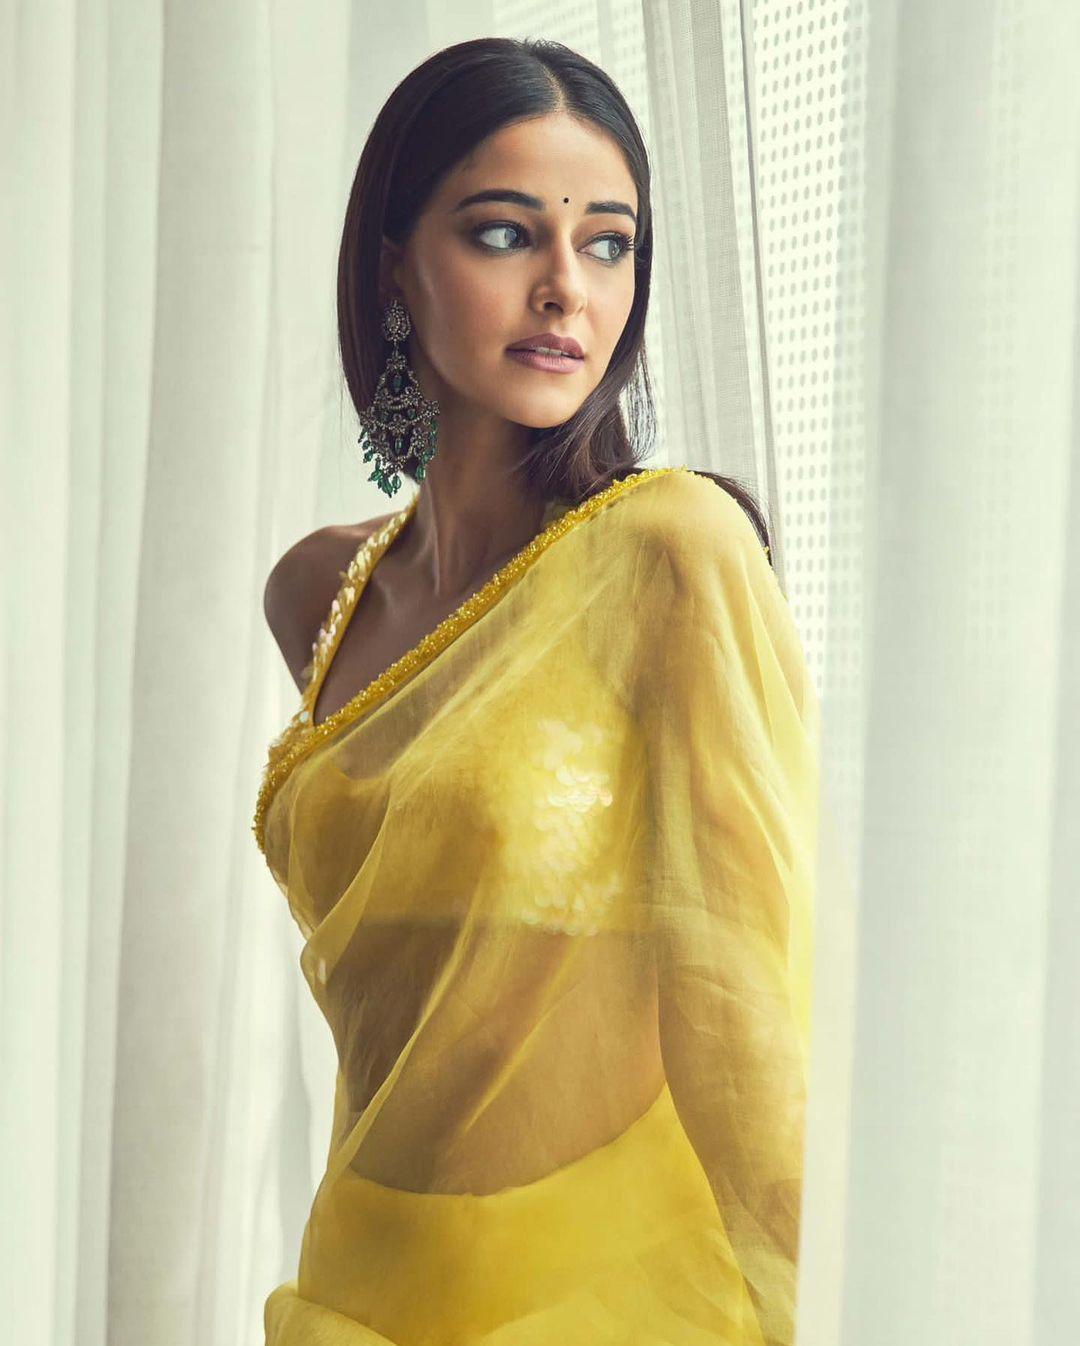 Ananya Panday looked absolutely resplendent in this yellow saree!